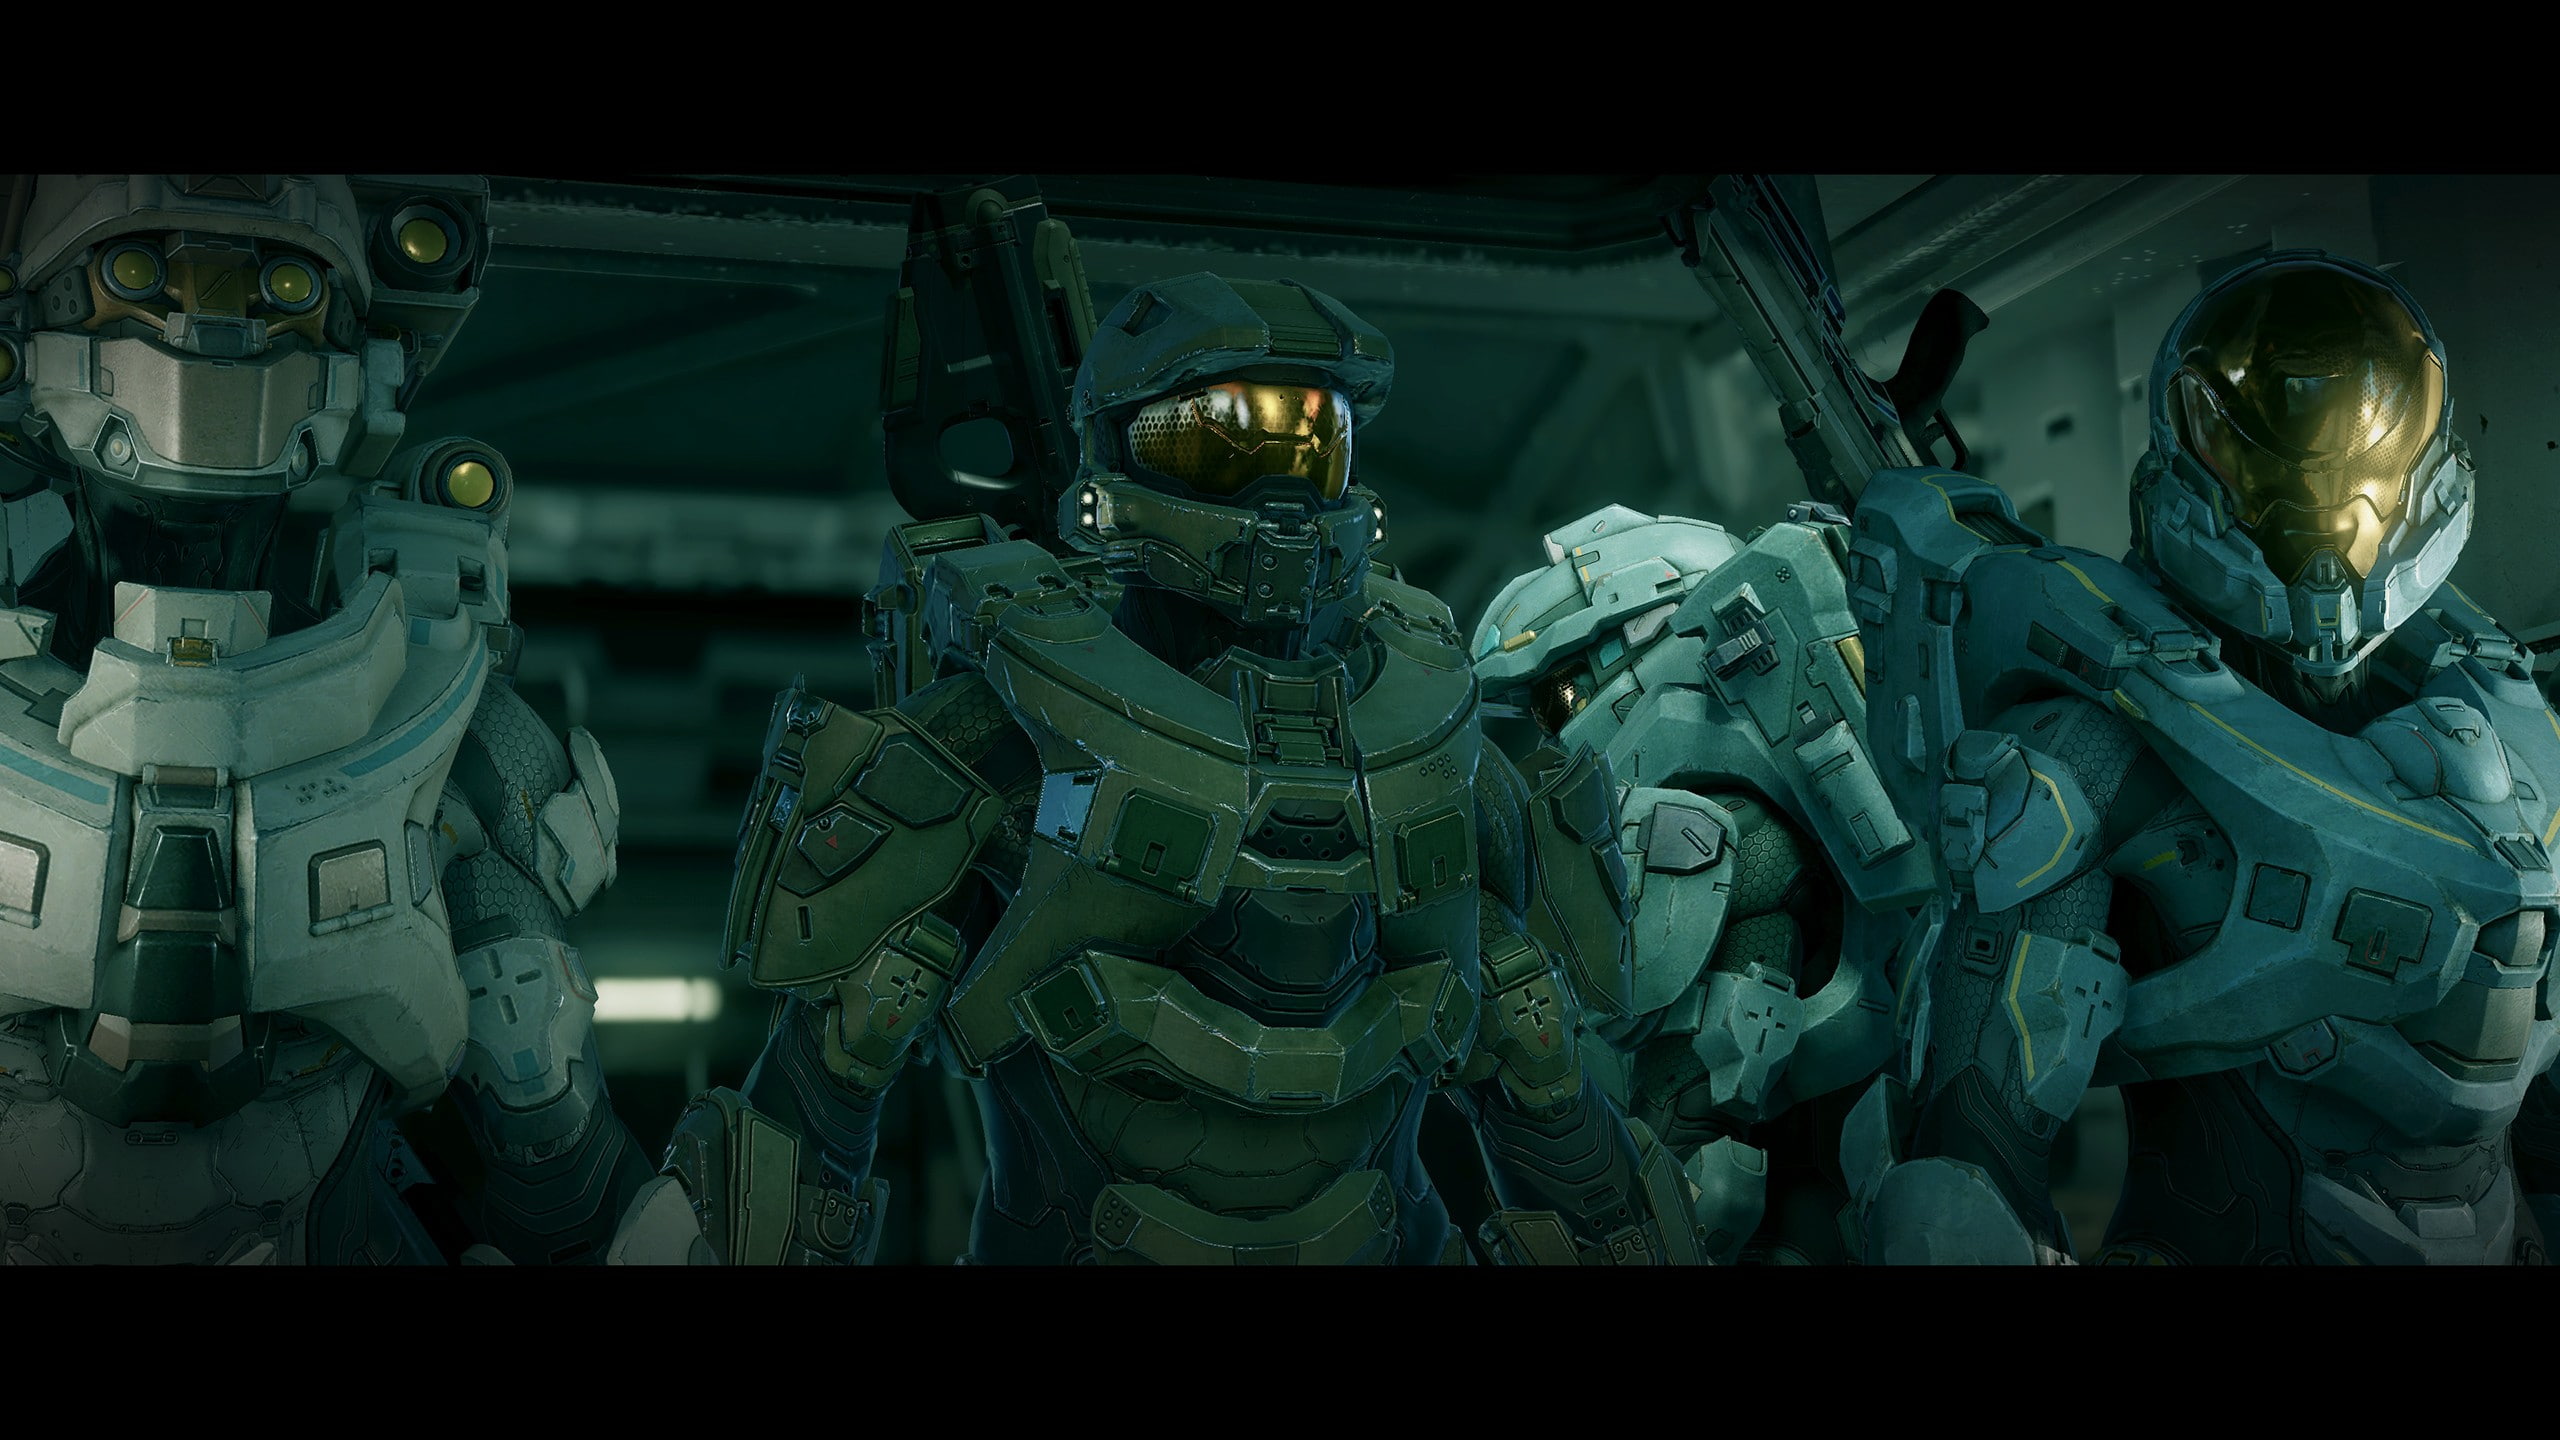 Halo, Halo 5, Master Chief, Halo: The Master Chief Collection